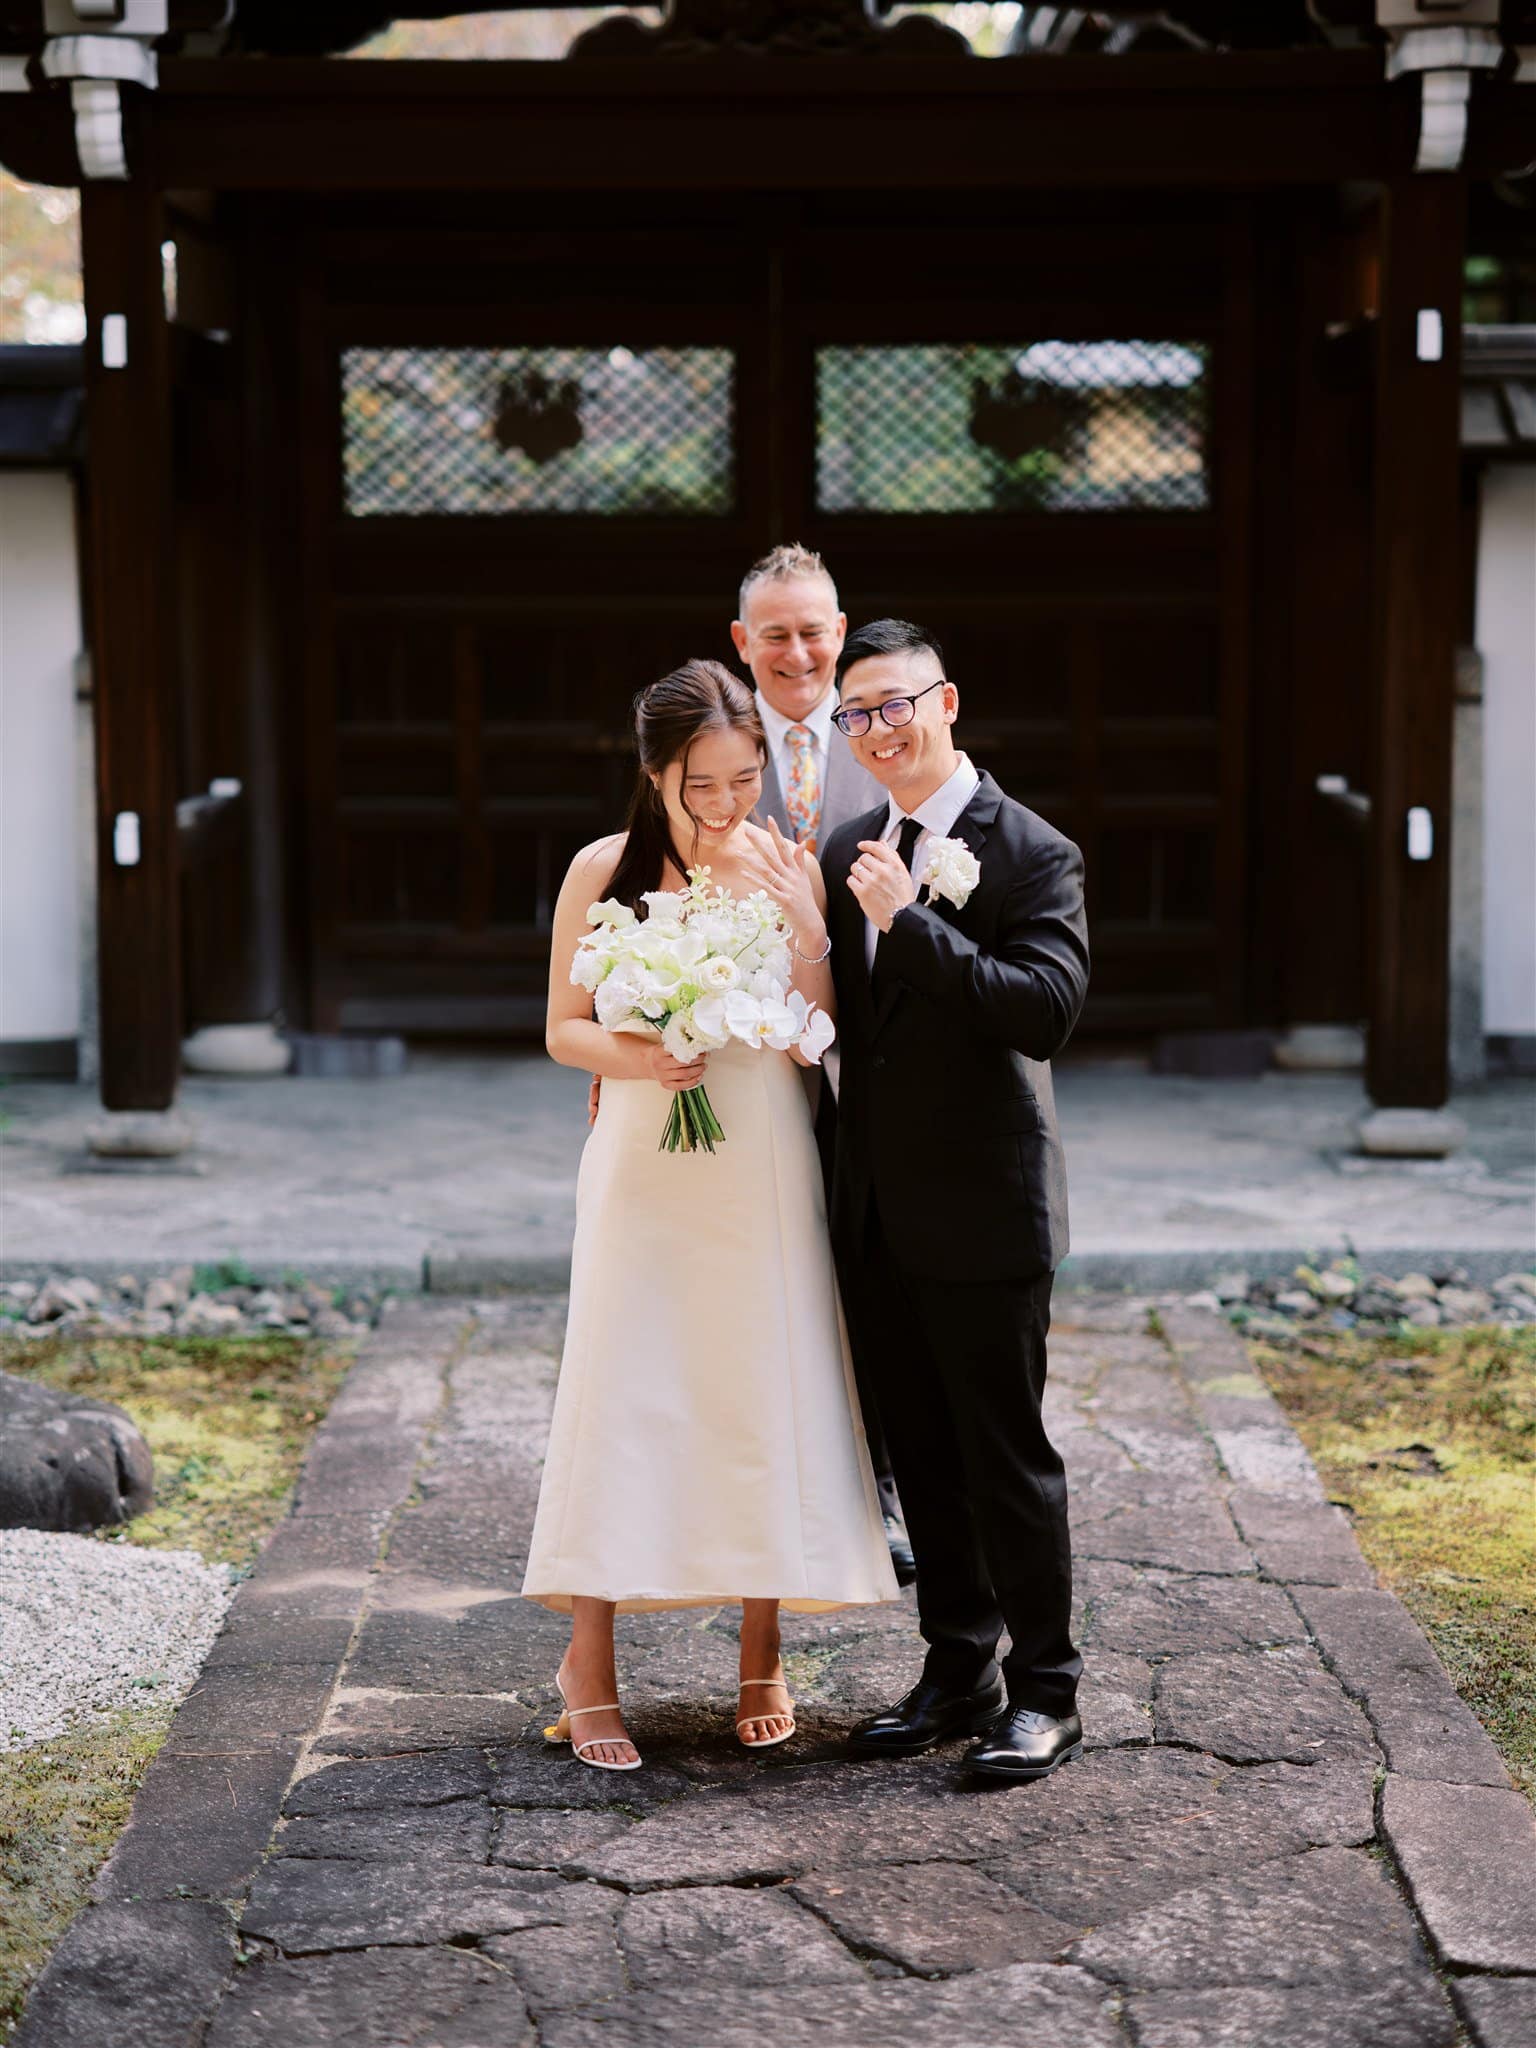 Kyoto Tokyo Japan Elopement Wedding Photographer, Planner & Videographer | A Japan elopement takes place with a bride and groom standing in front of a Japanese temple.